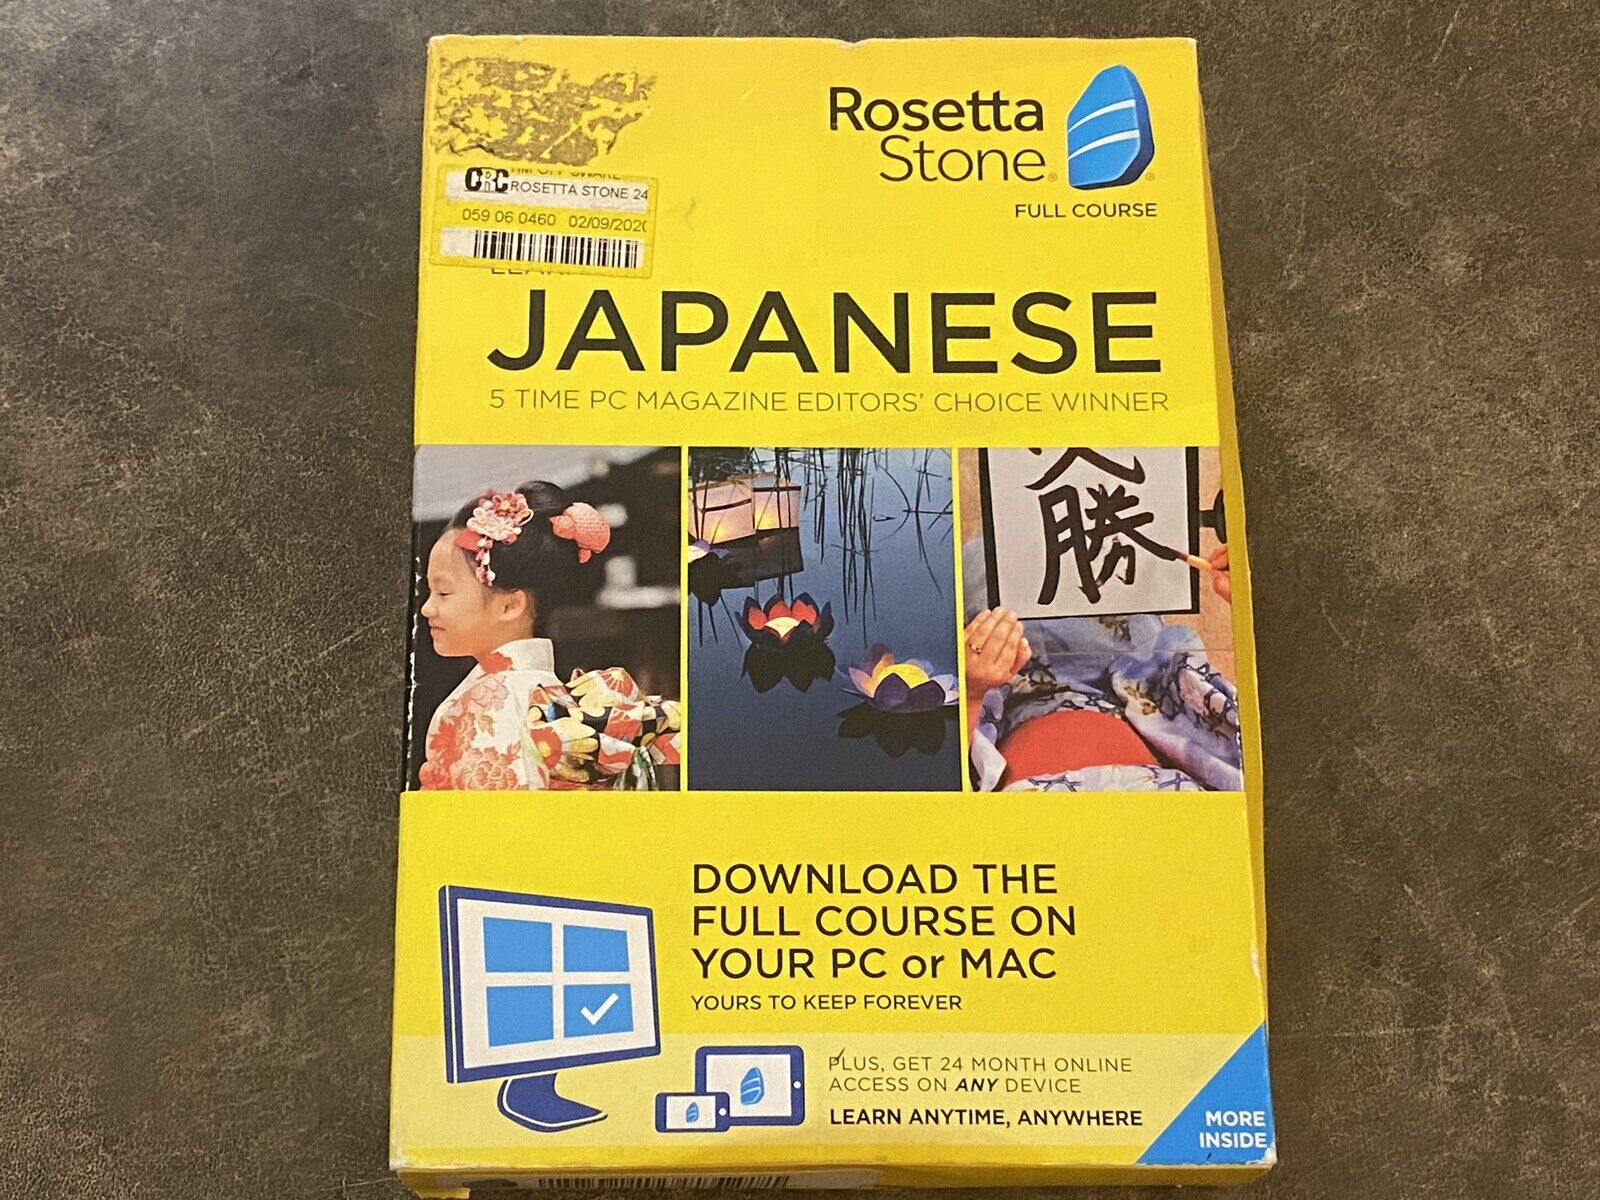 Rosetta Stone Learn Japanese Full Course Download Code & 24 Month Online Access